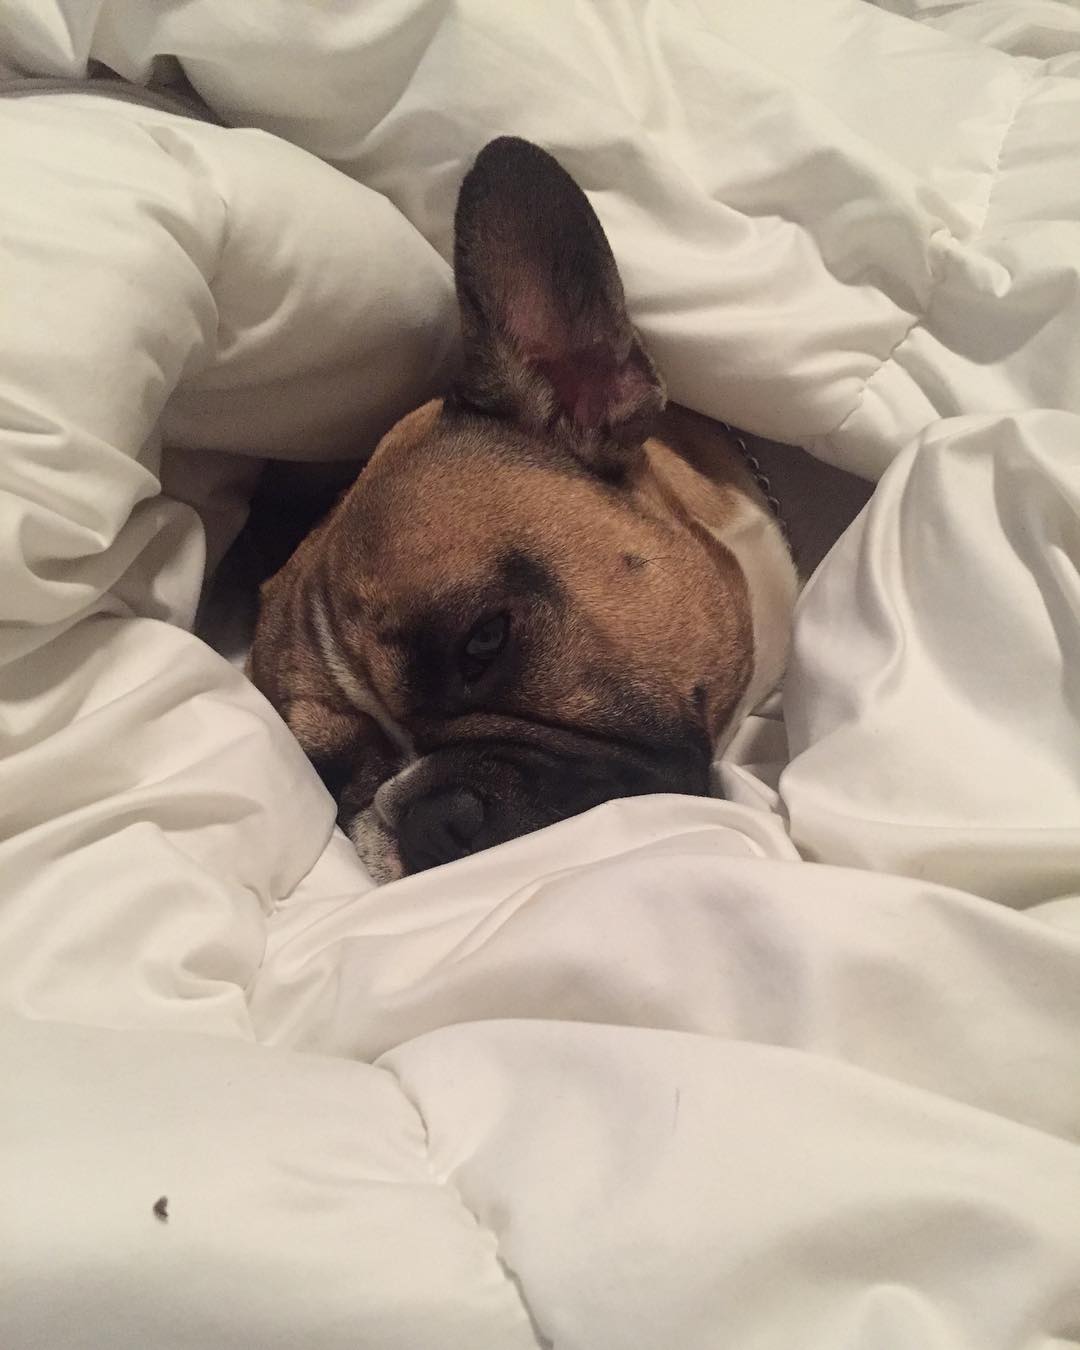 Can you just stay in bed with me? #tuesdaymorning #frenchieoftheday #frenchbulldog #frenchiegram #frenchielove #frenchiesofig…